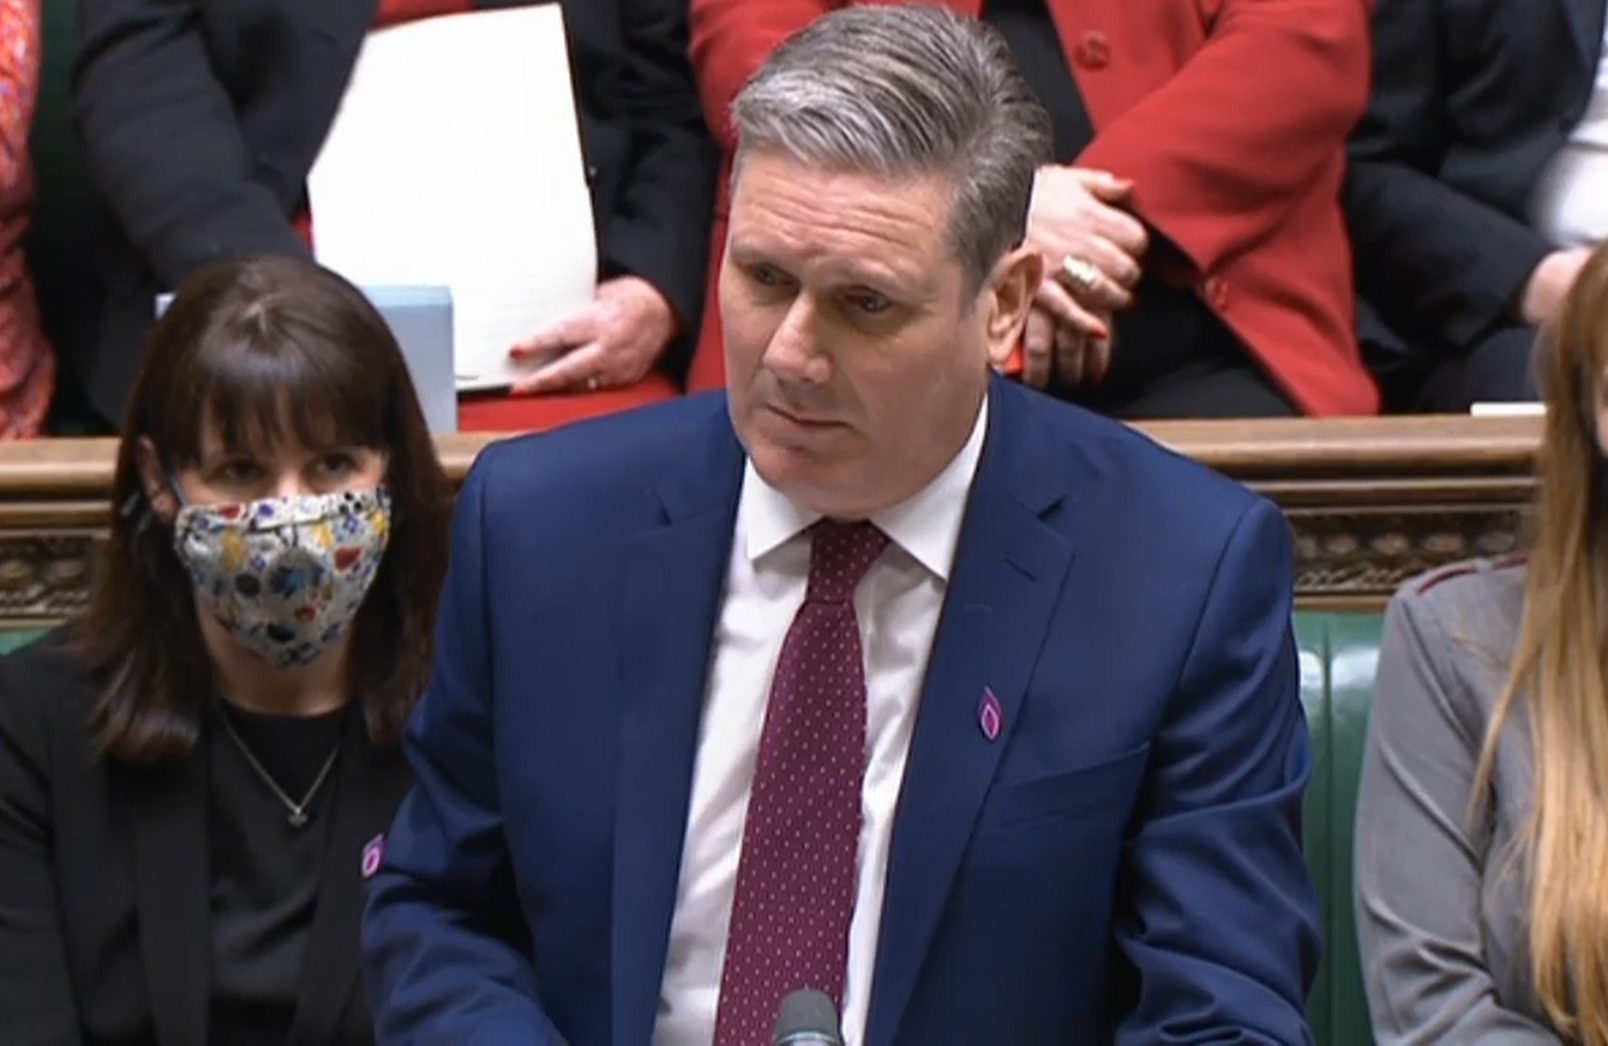 Labour leader Keir Starmer speaks during Prime Minister's Questions in the House of Commons, London, on January 26.